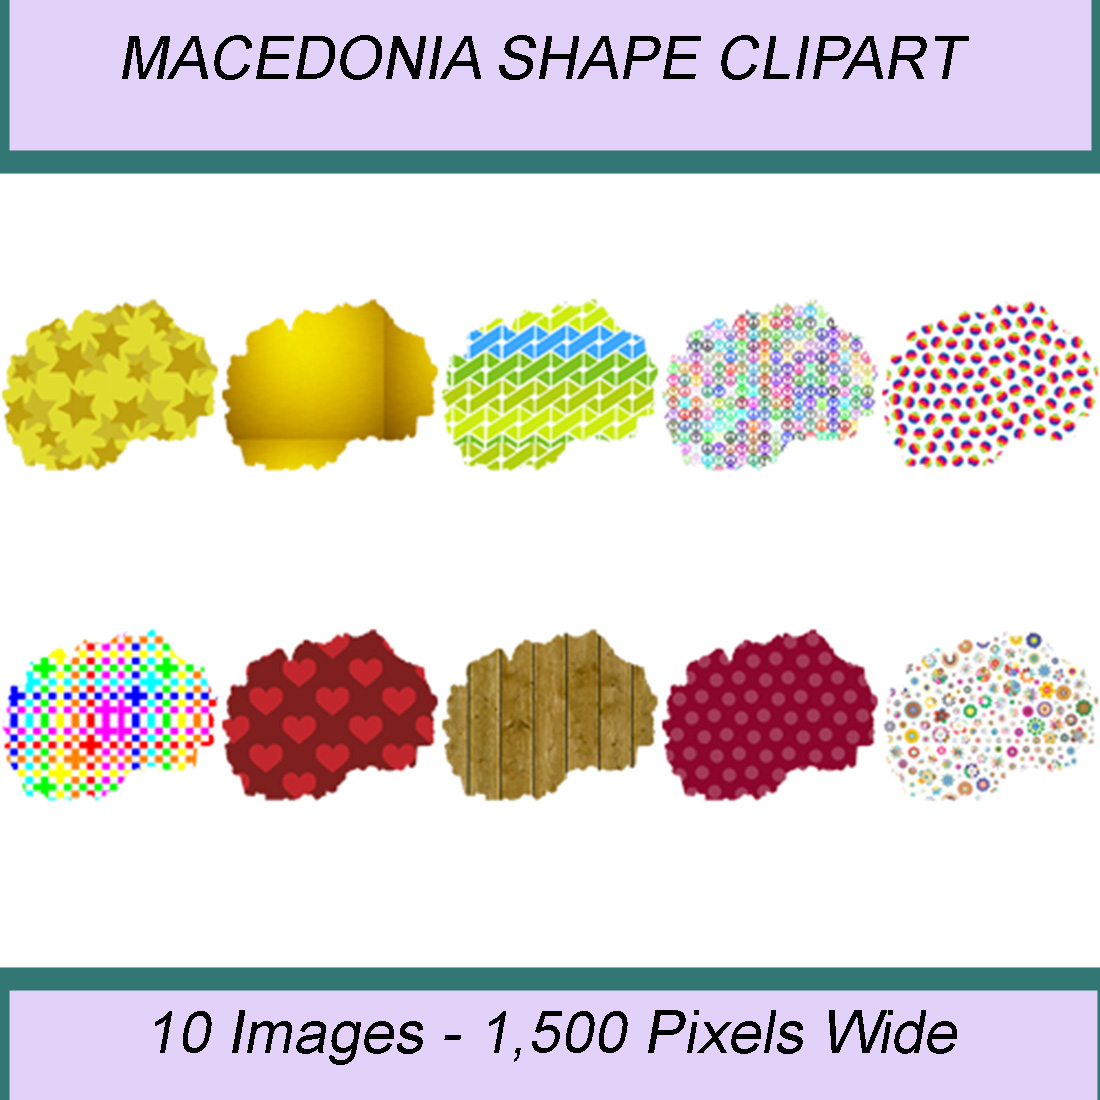 MACEDONIA SHAPE CLIPART ICONS cover image.